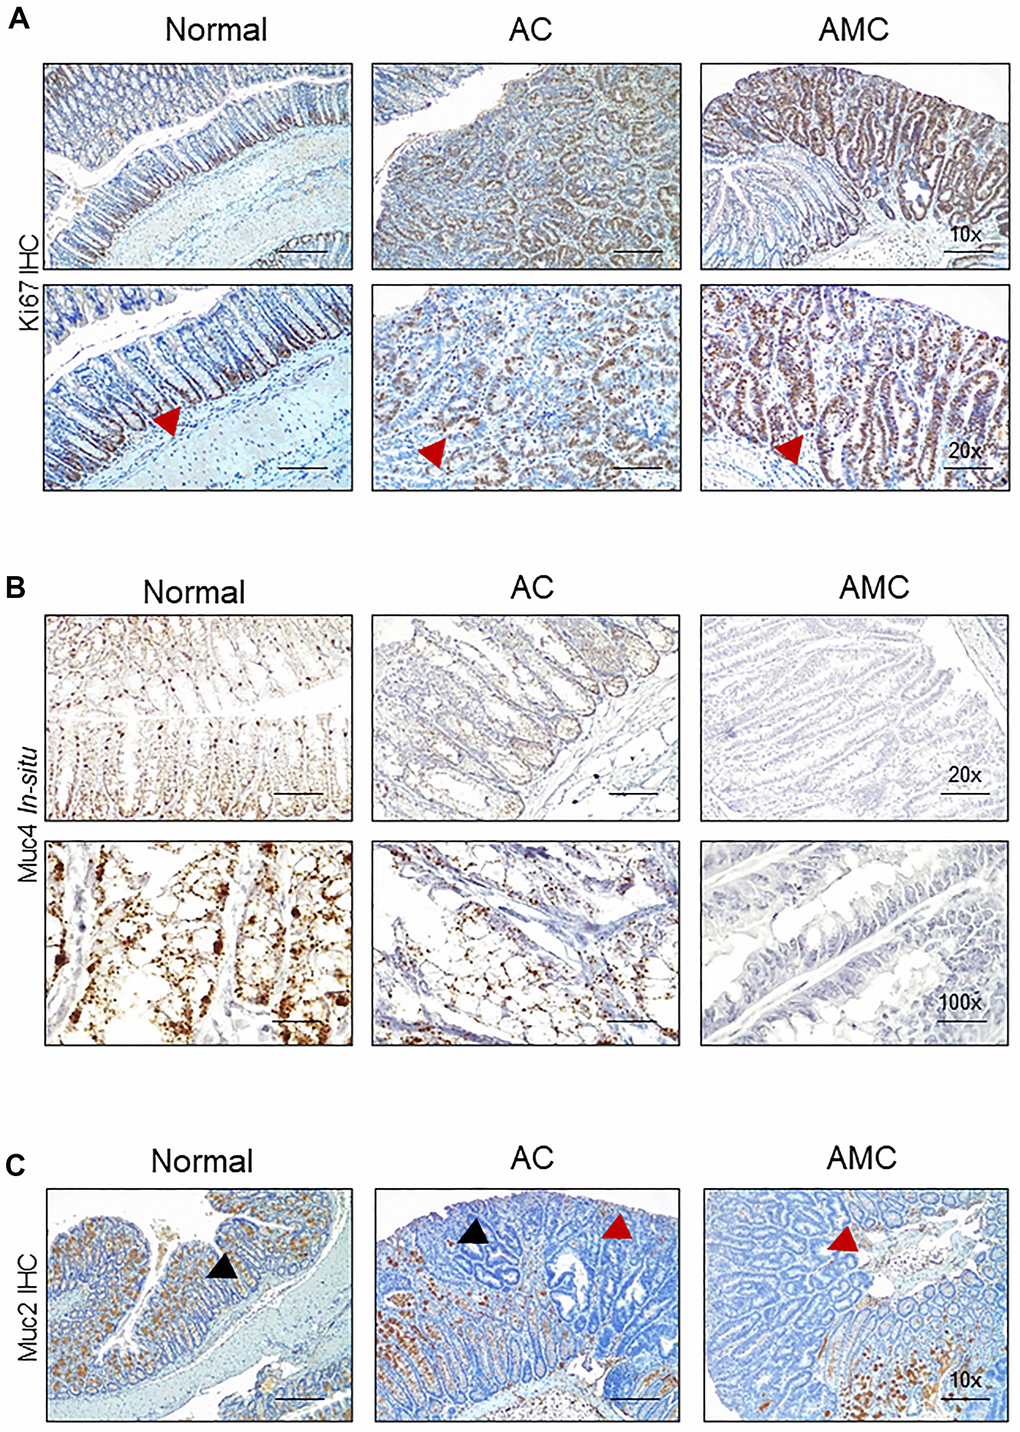 Absence of Muc4 alters other mucins expression. (A) Immunohistochemistry staining of Ki67 in the colon of normal, AC, and AMC mice. Red arrowhead indicates Ki67 staining restricts to crypts in normal animals, whereas AMC mice showed higher cell proliferation (more Ki-67 staining), which might be attributable to colonic crypt hyperplasia. (B) Staining of Muc4 was observed in normal, AC mice, whereas the complete absence of Muc4 expression in AMC animals was performed by in-situ hybridization. (C) Immunohistochemistry staining of Muc2 (Black arrowhead: positive staining and Red arrowhead: absence of staining in the tumors). n = 6 (AC and AMC) and n=3 for normal group.